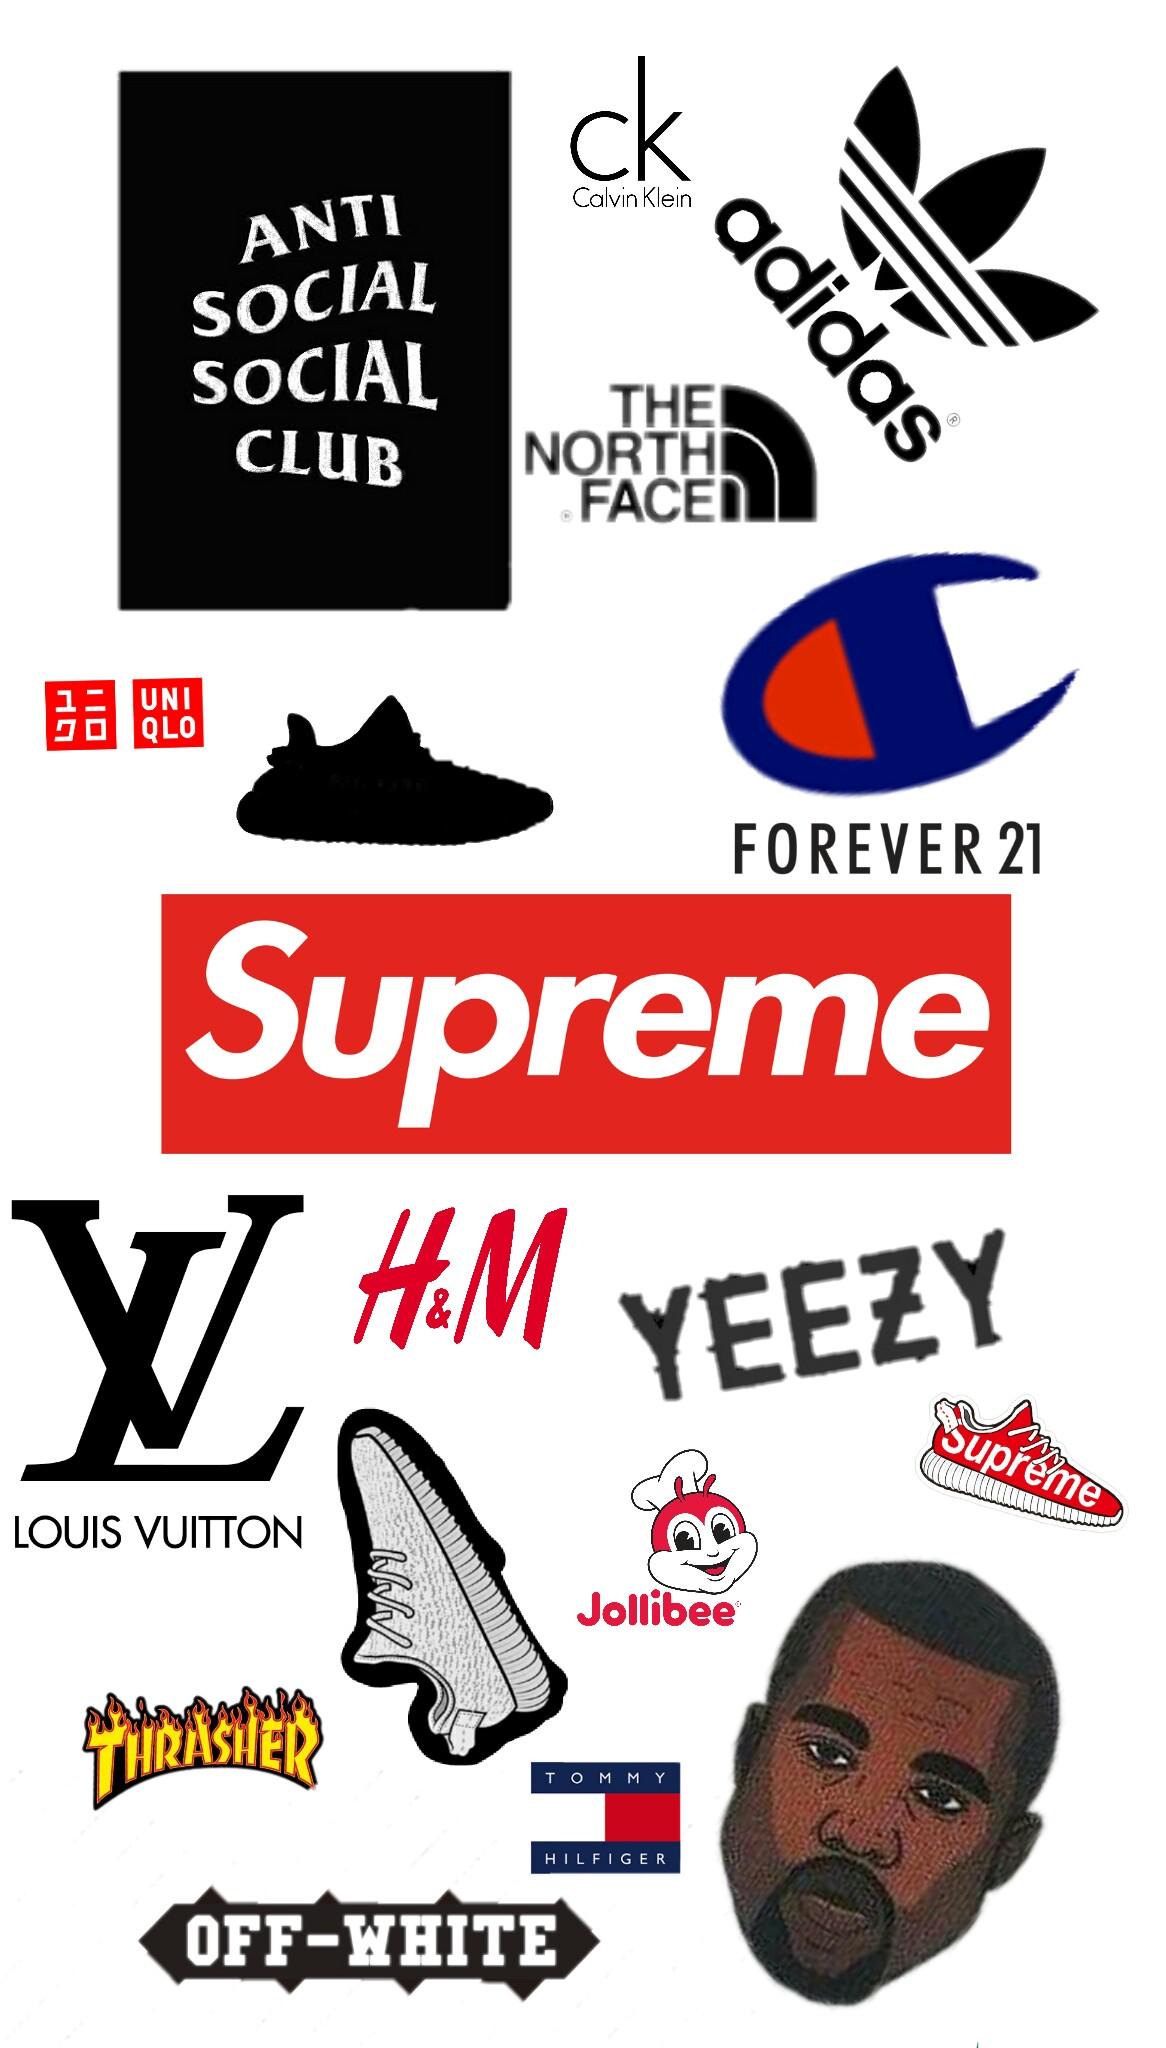 Sup Lv wallpaper by wexitos - 43 - Free on ZEDGE™  Adidas iphone wallpaper,  Supreme wallpaper, Nike wallpaper backgrounds